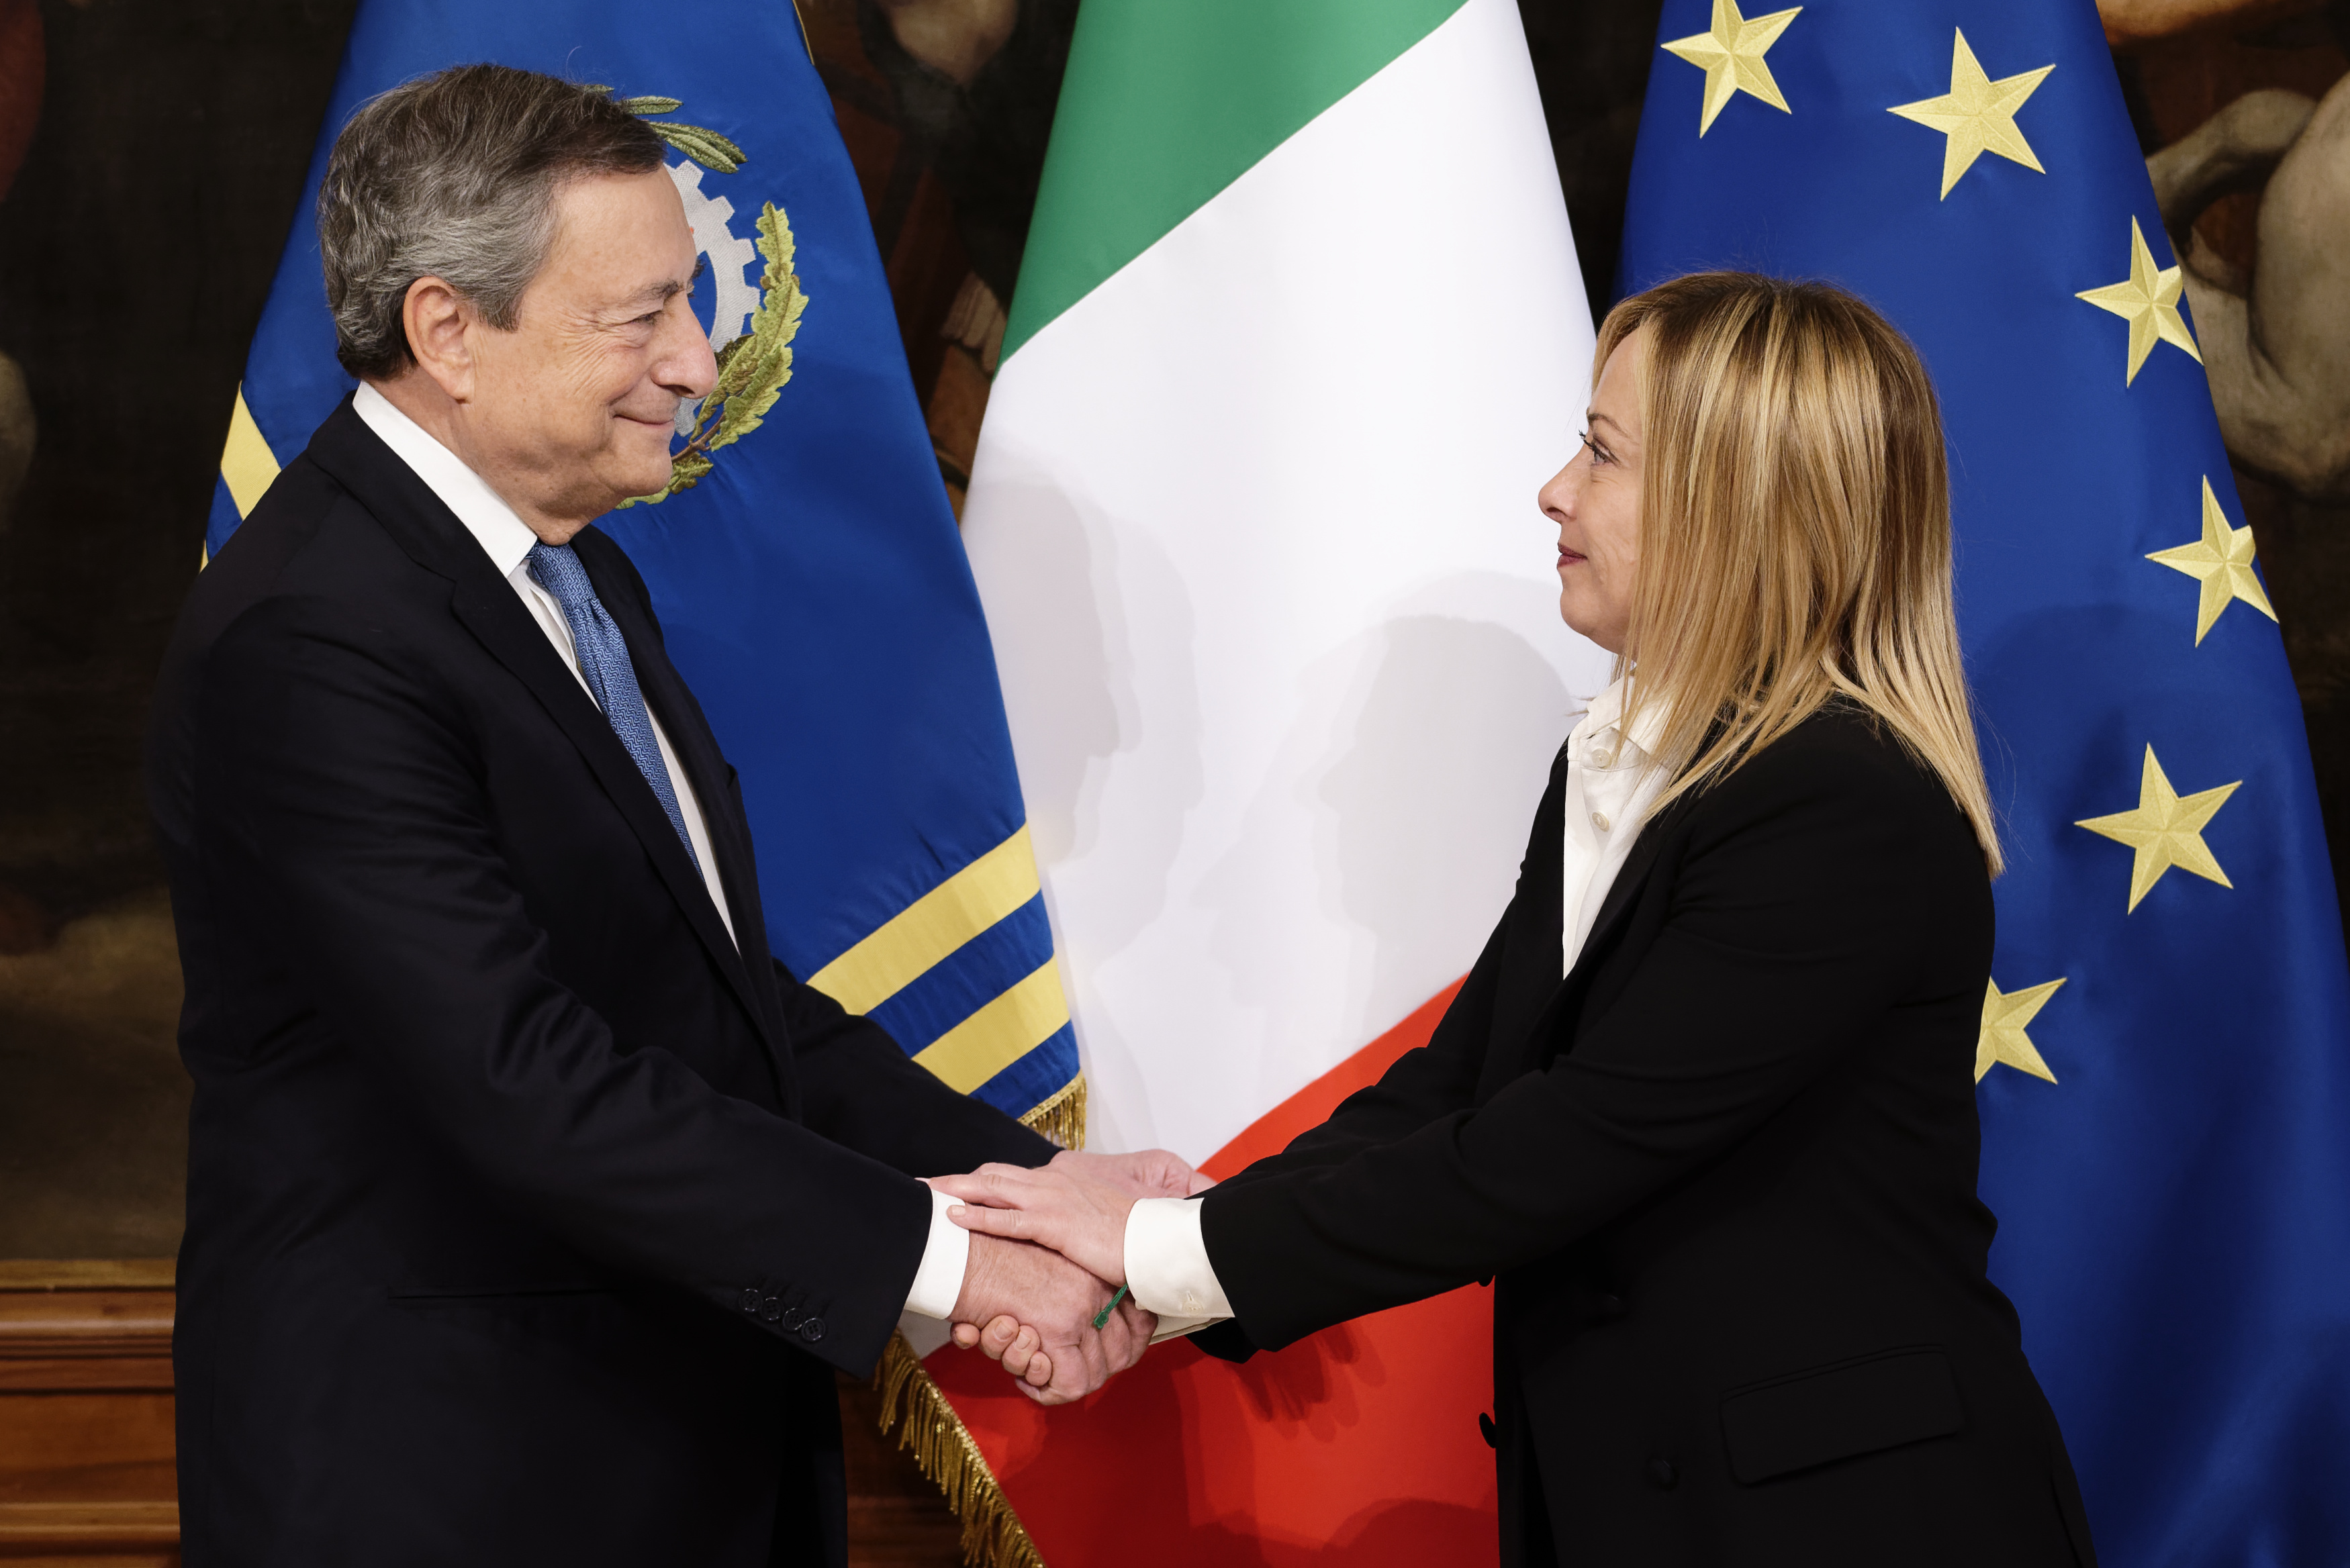 Mario Draghi and Italy's new prime minister, Giorgia Meloni shake hands during the cabinet minister bell handover ceremony at Palazzo Chigi in Rome, on Sunday.